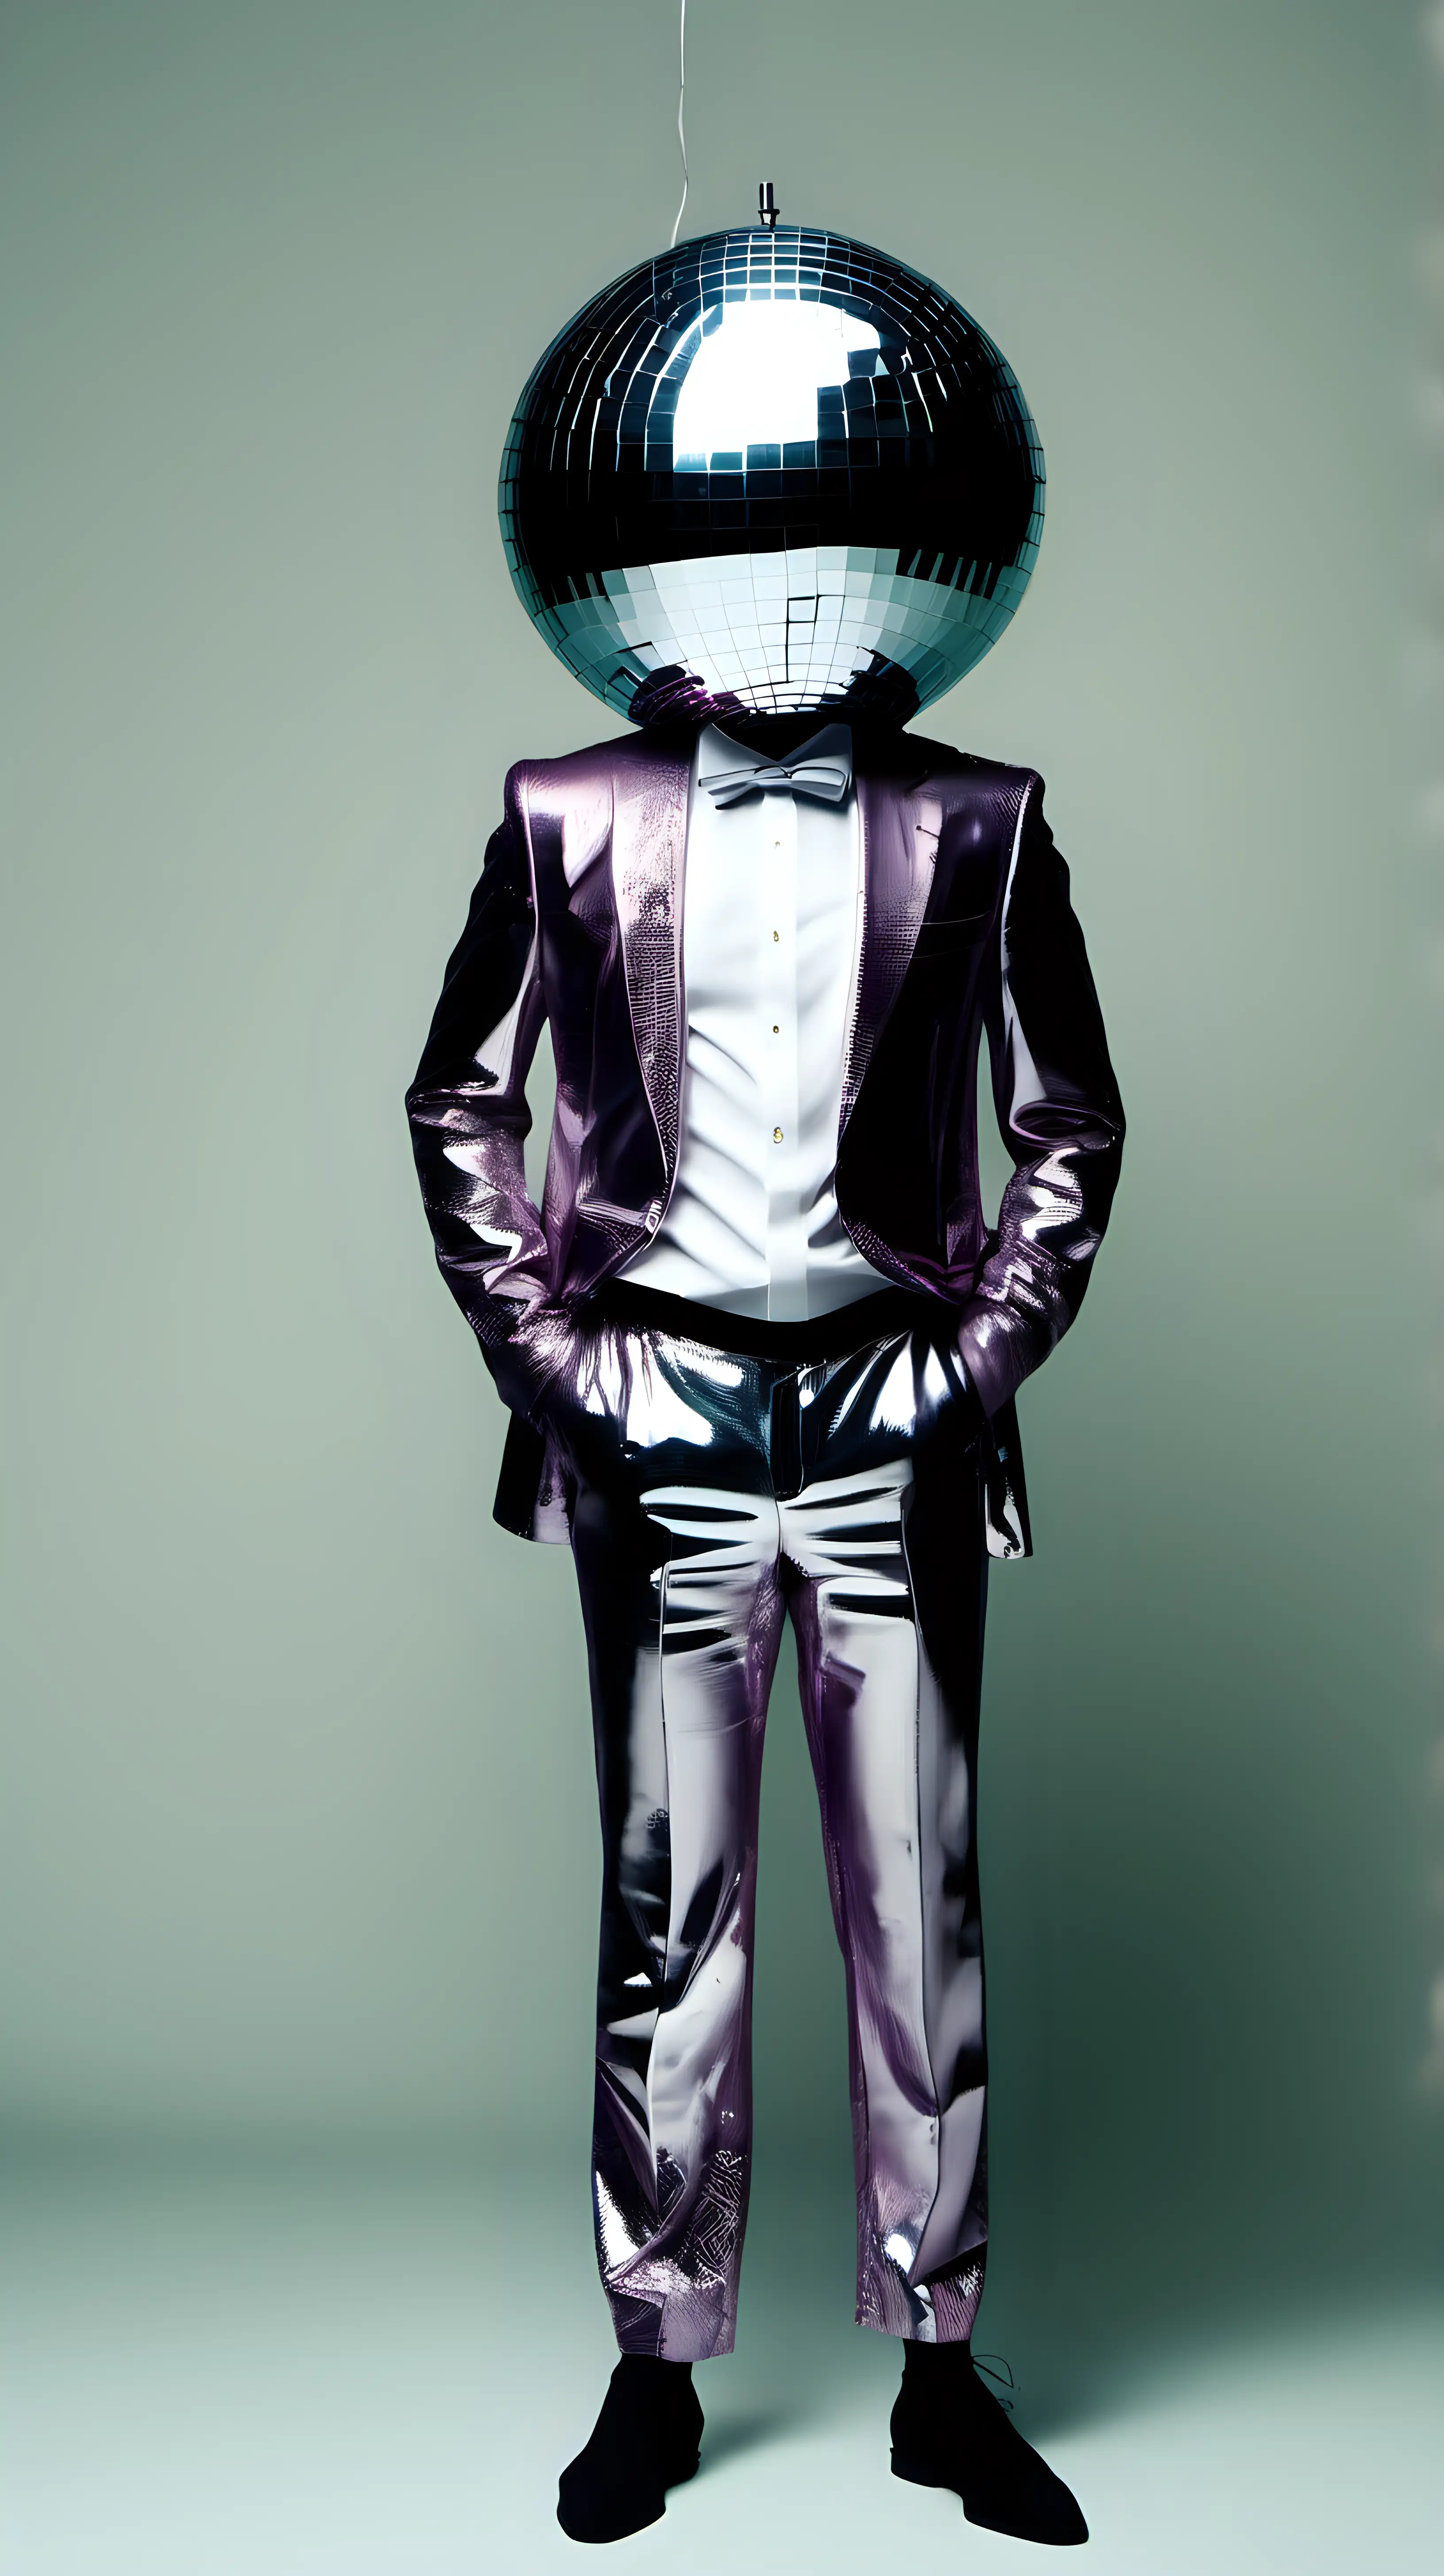 a person with party clothes and a mirror ball instead of the head